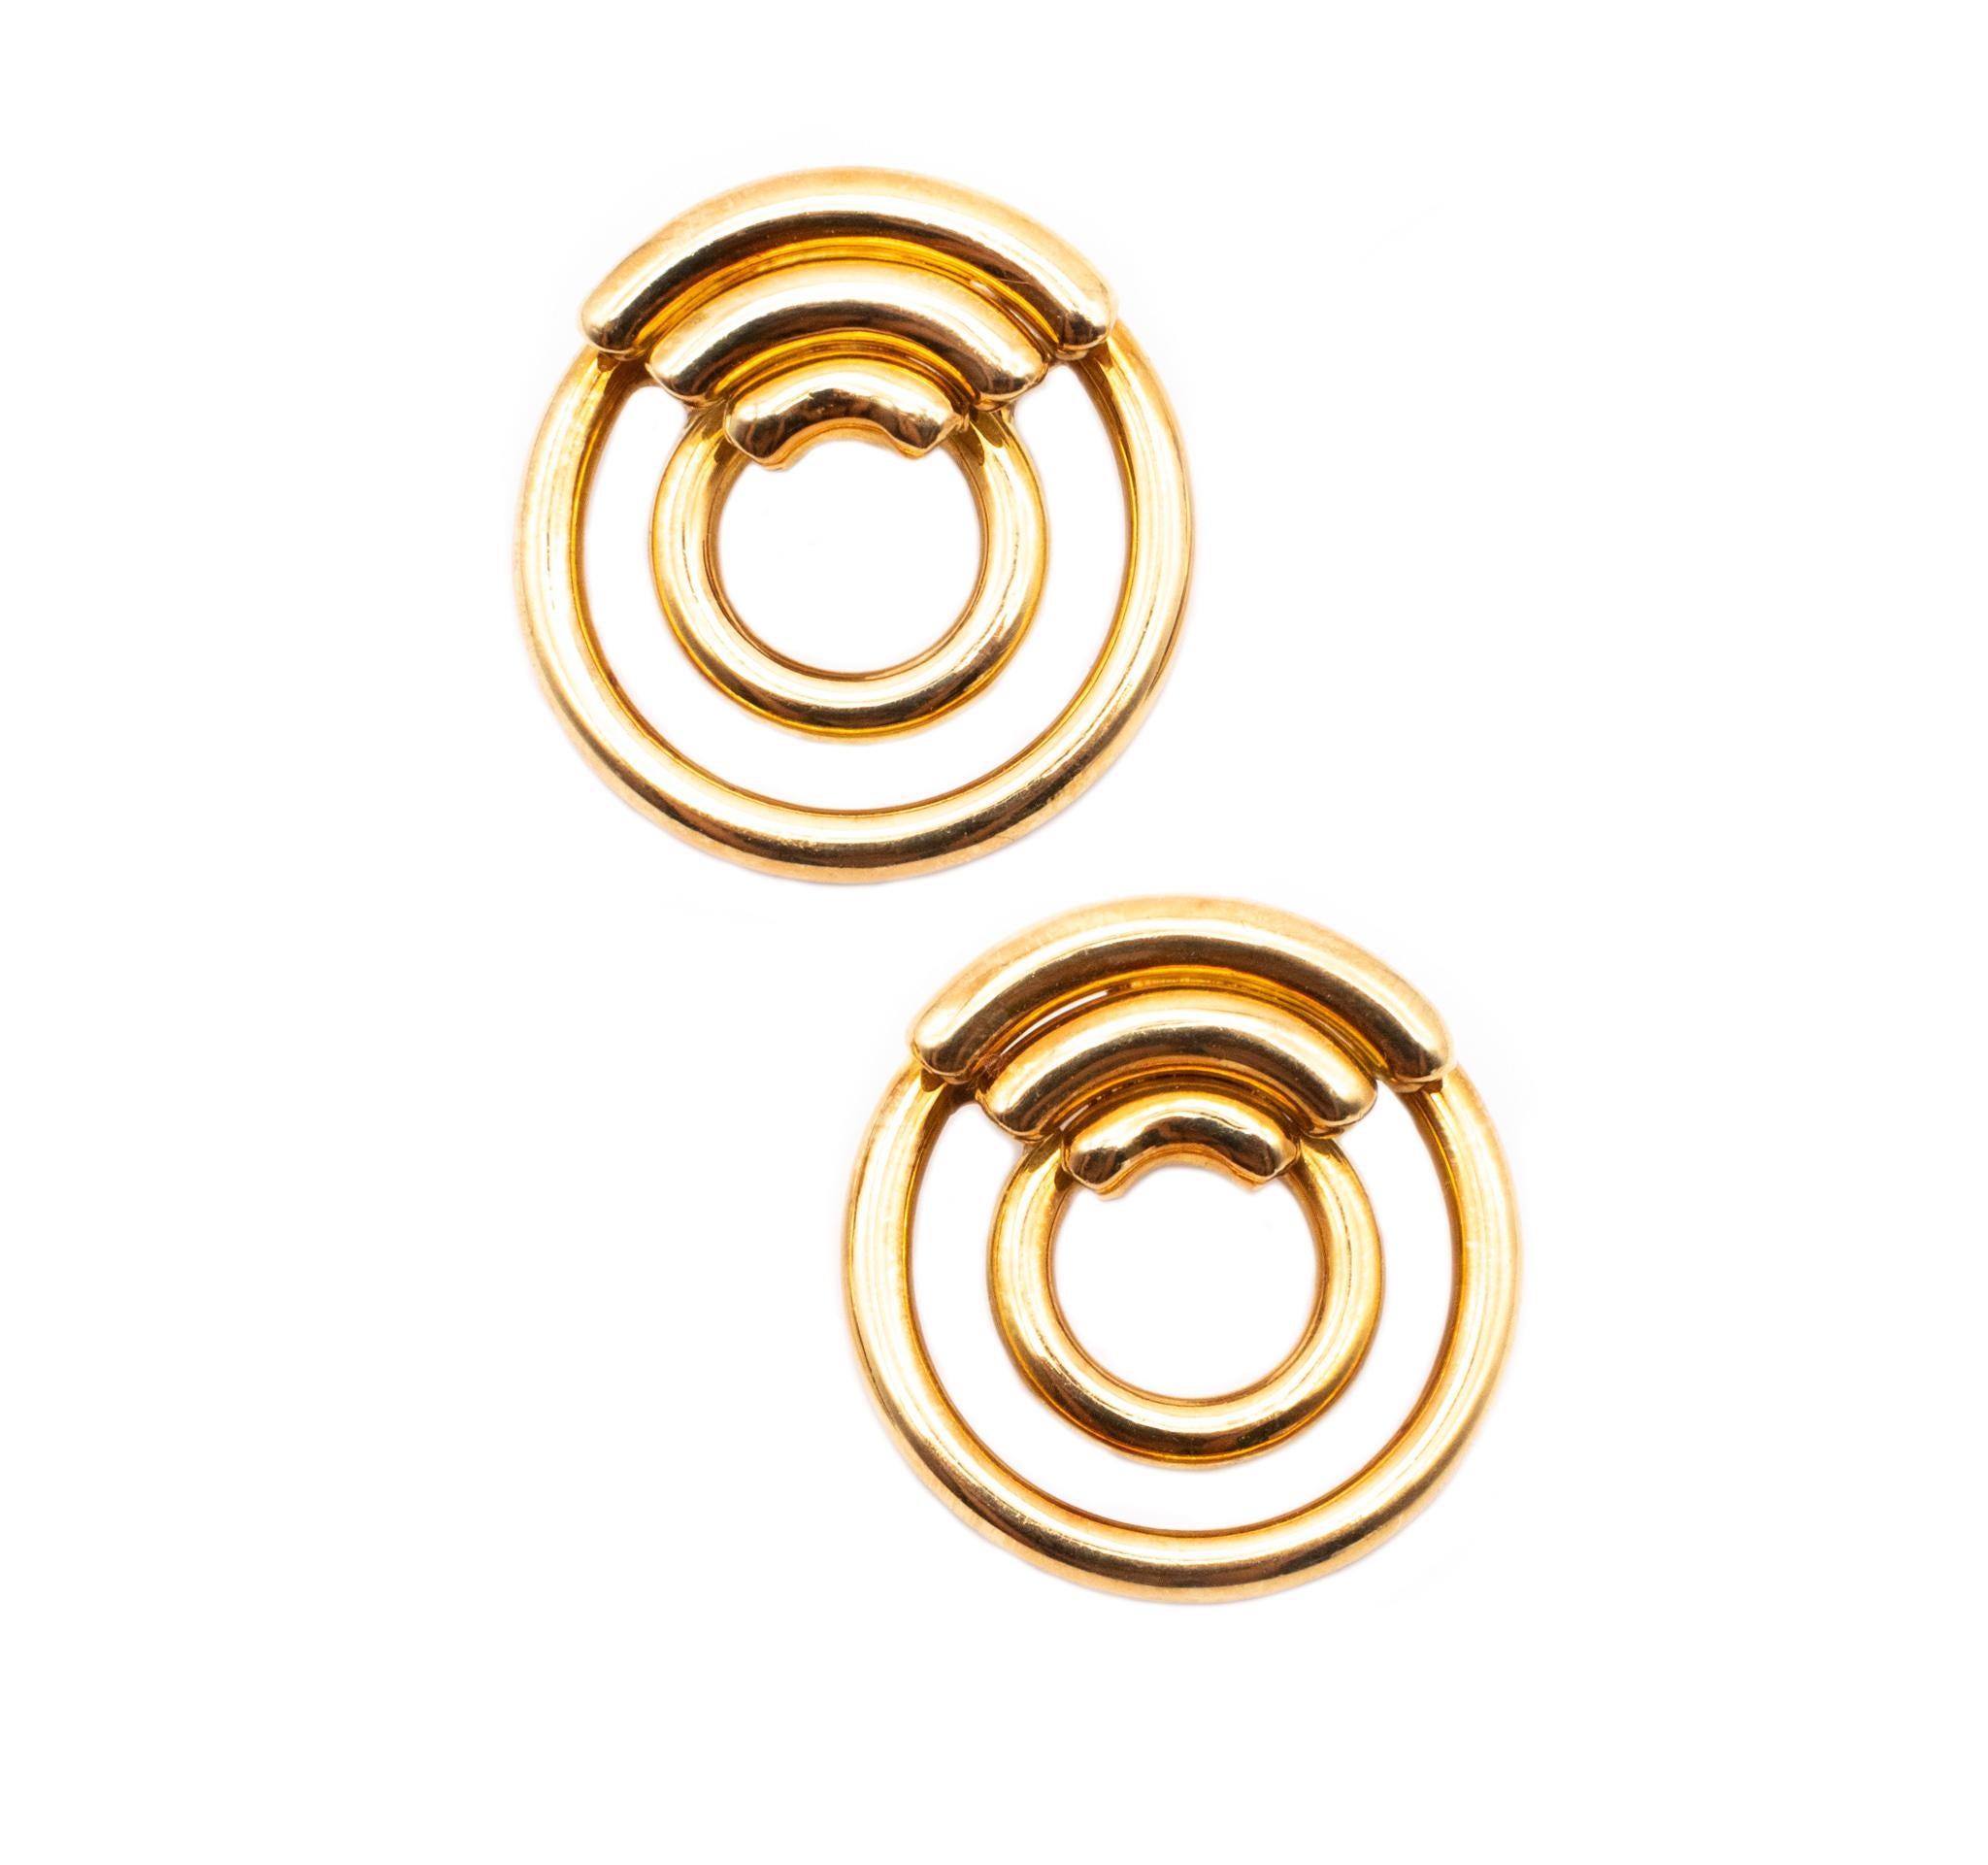 Rare pair of earrings designed by Aldo Cipullo (1936-1984) for Cartier.

Rare geometric geometric circled pieces created in New York city by Aldo Cipullo, during the collaboration period with the house of Cartier (1969-1975) as a designer.

This